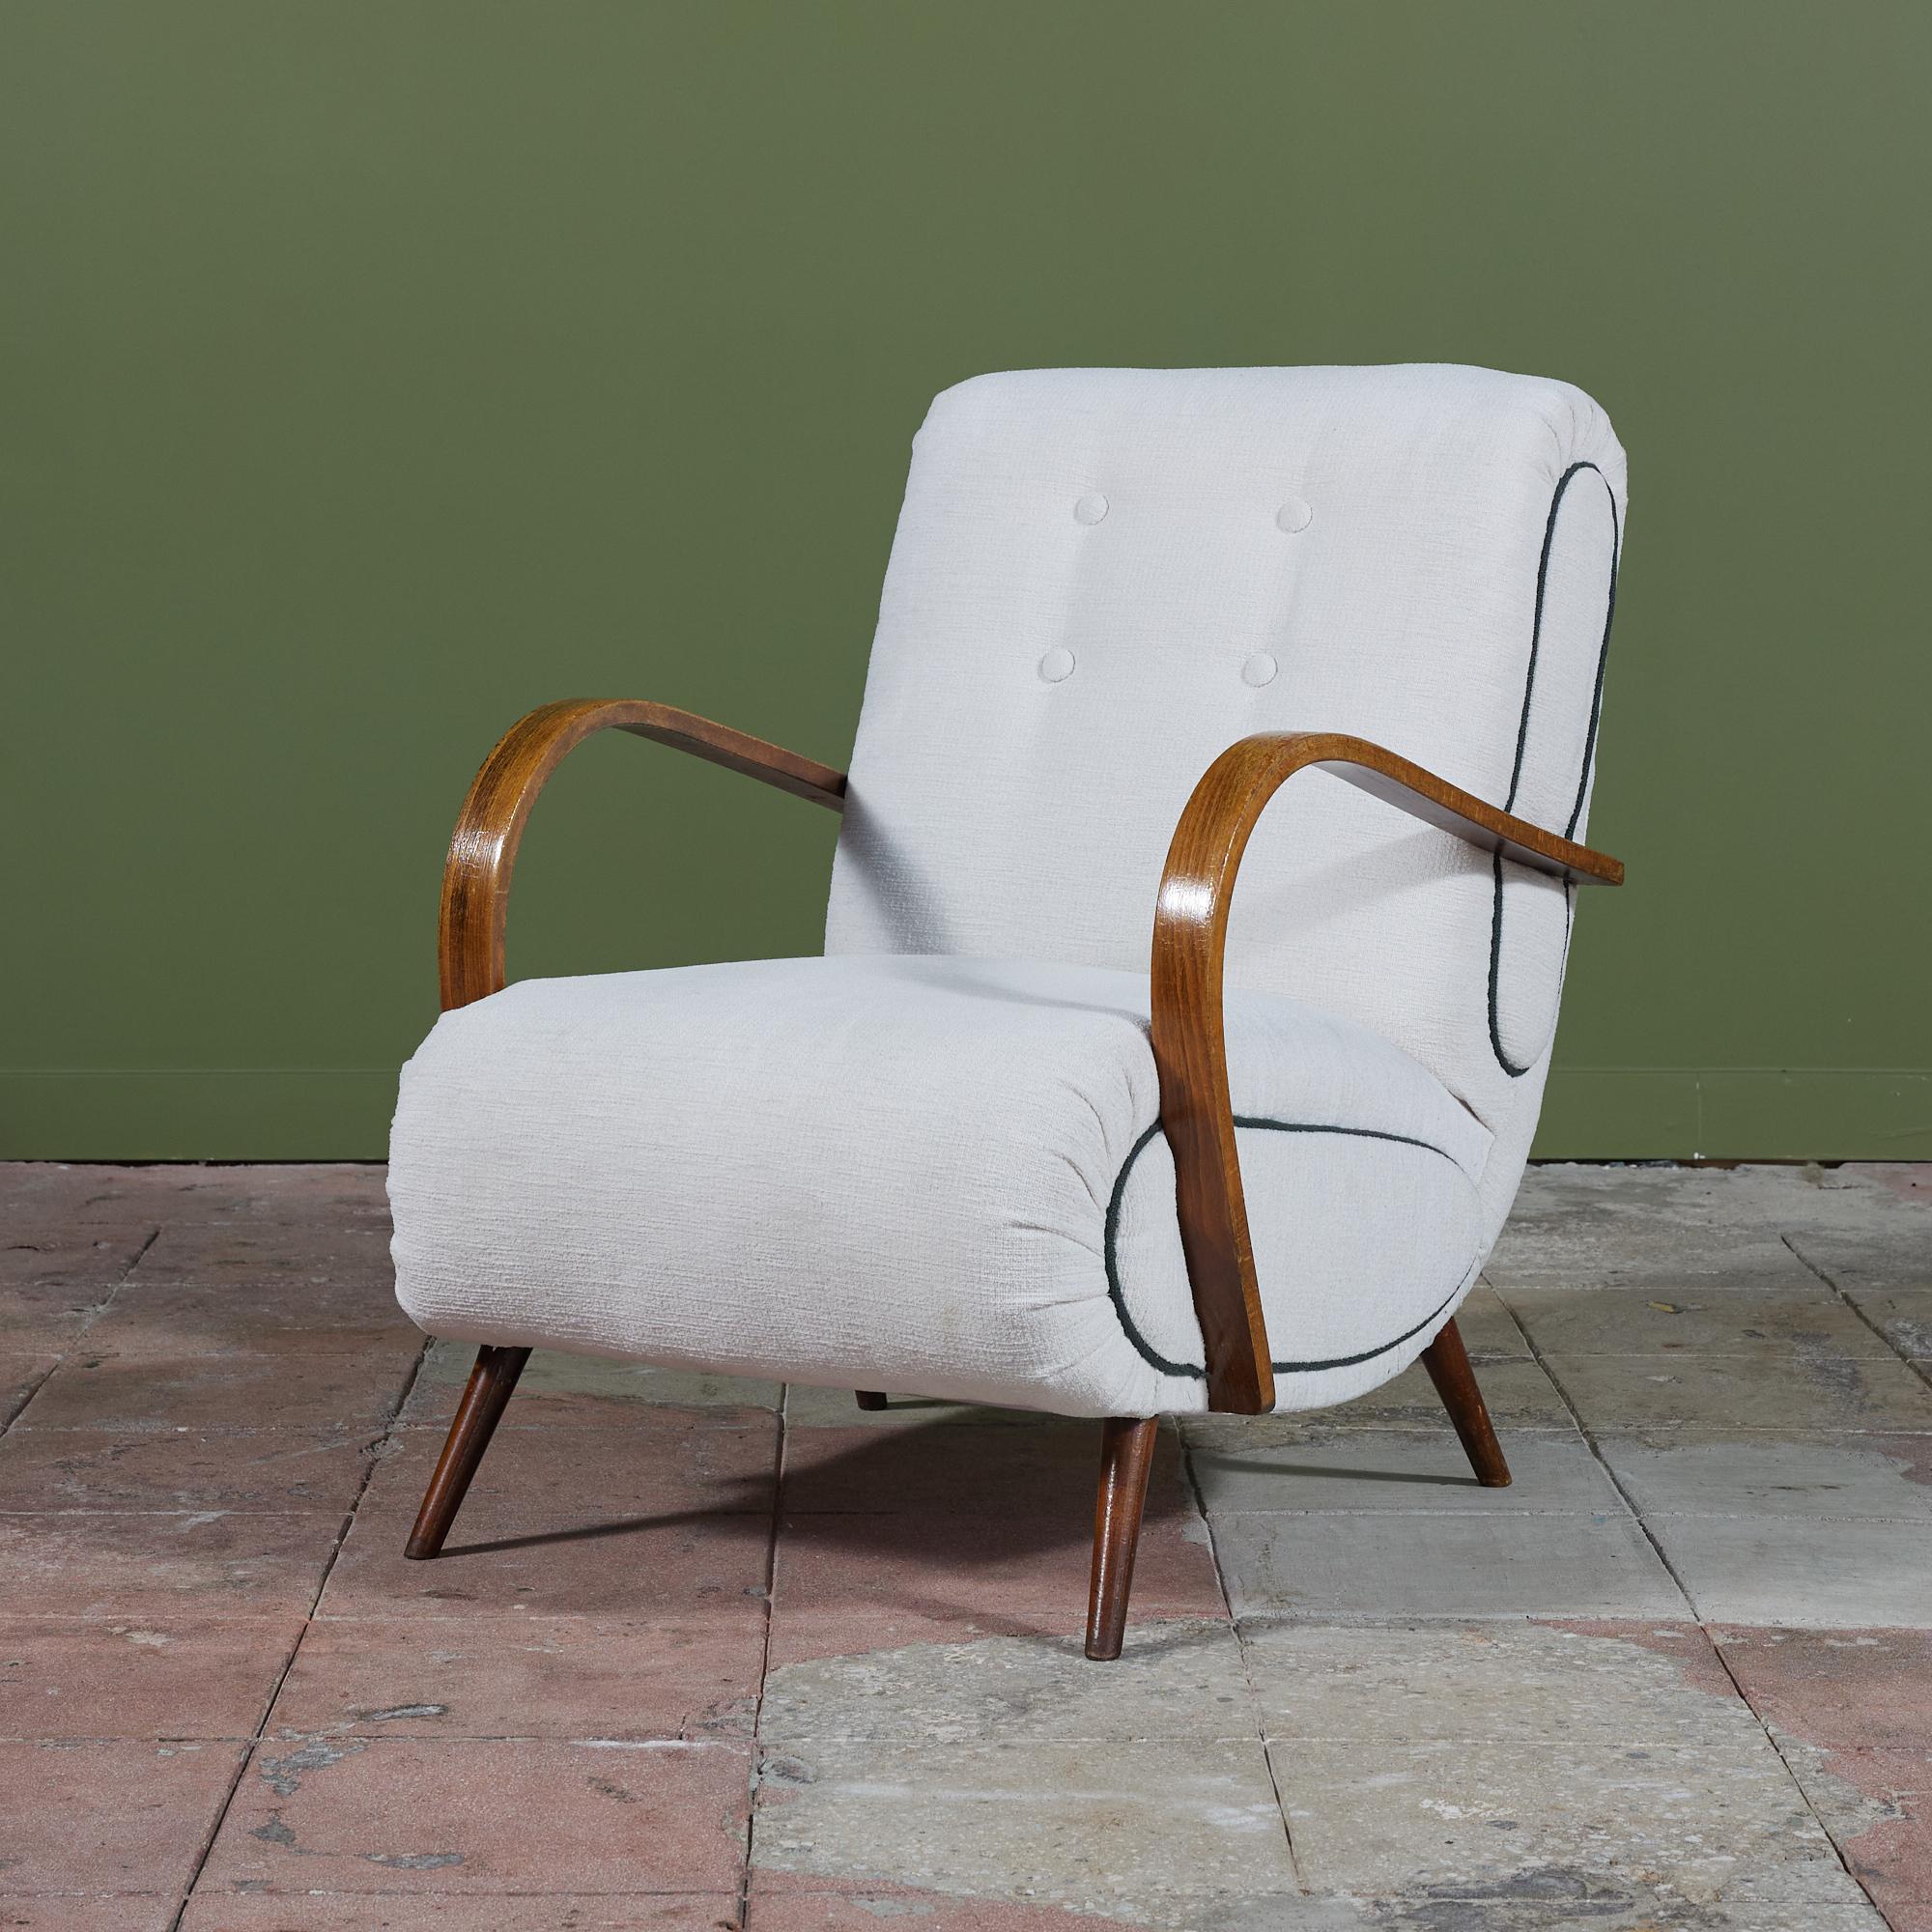 Lounge chair attributed to Italian designer Paolo Buffa. The chair features a textured linen upholstery with dark green piping at each side. The birch frame showcases beautiful bentwood arms with four tapered splayed legs. The seat back has four